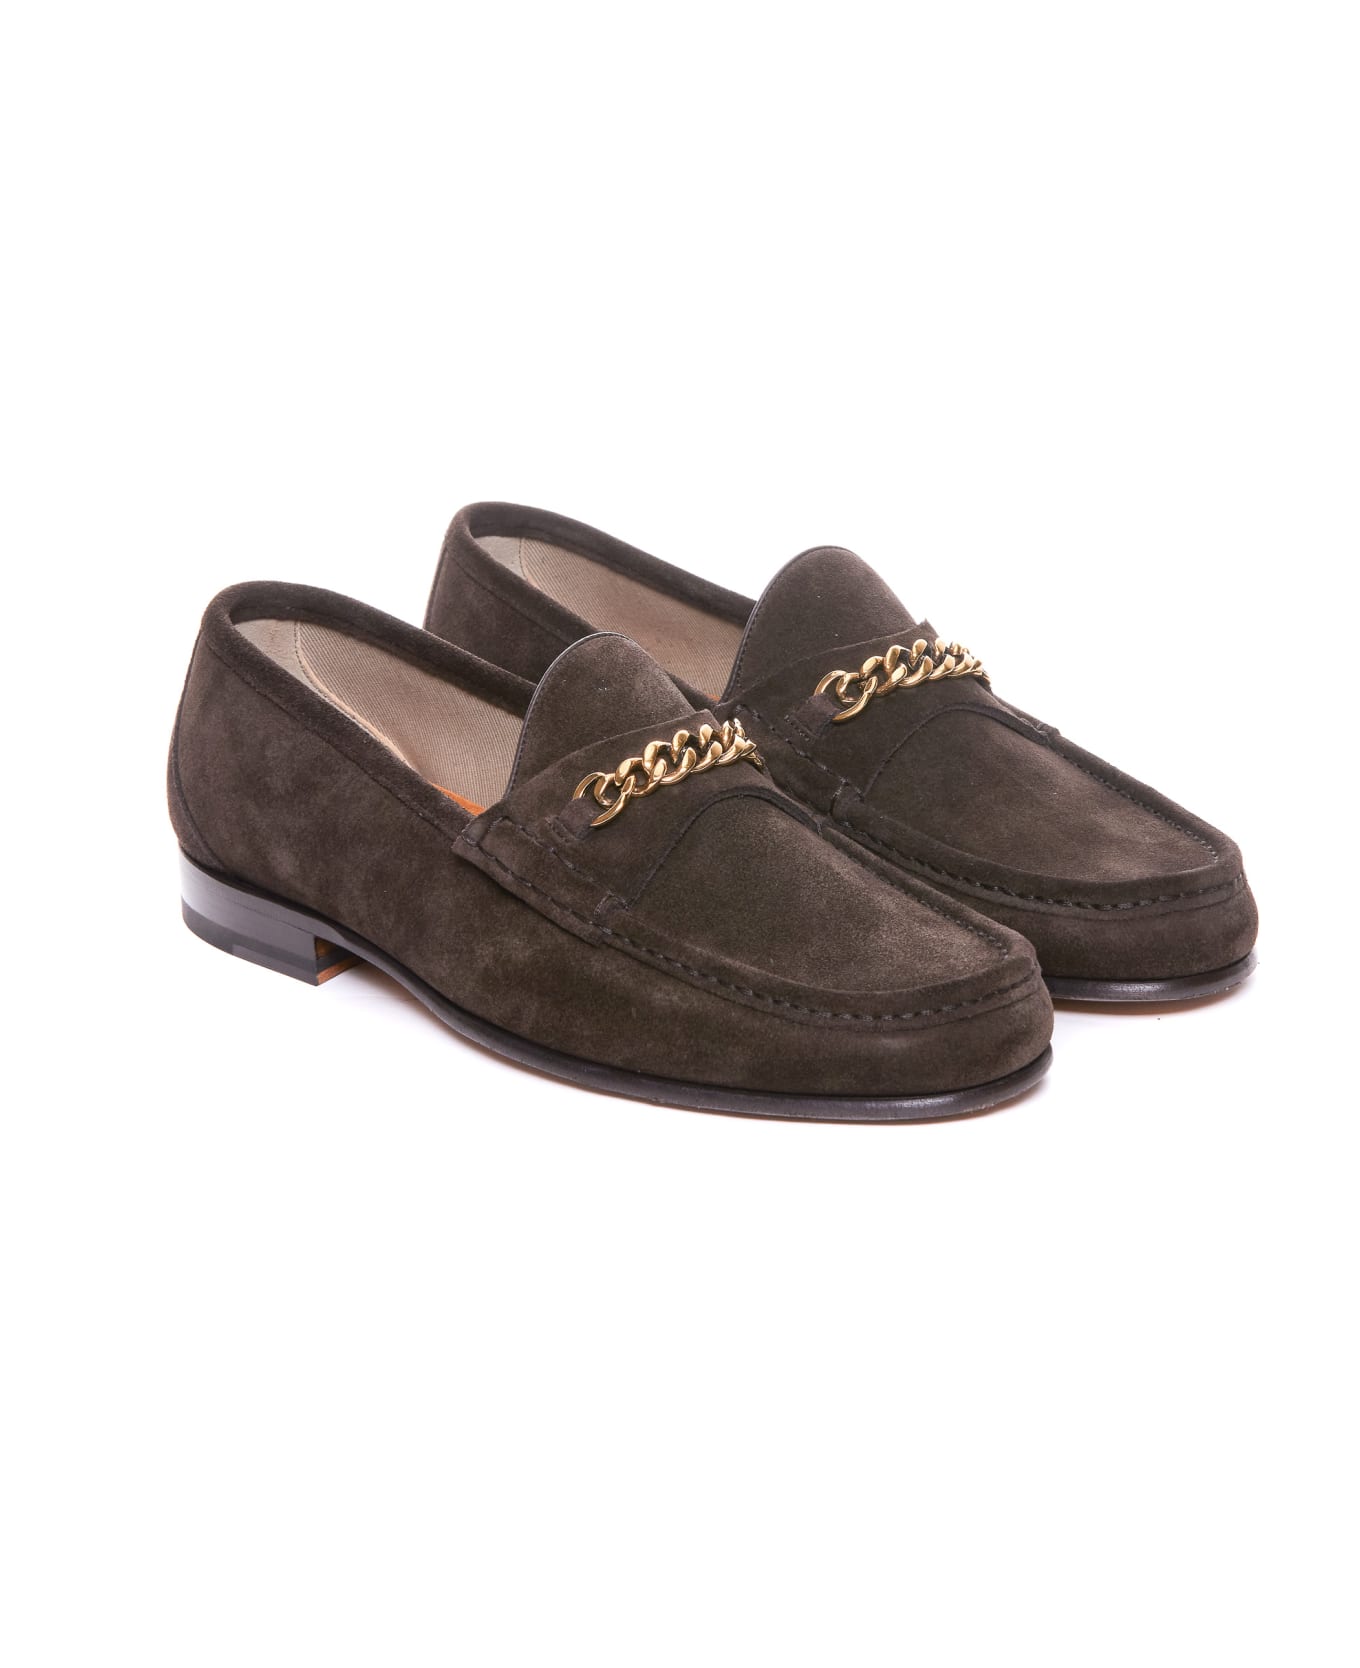 Tom Ford Formal Loafers - Brown